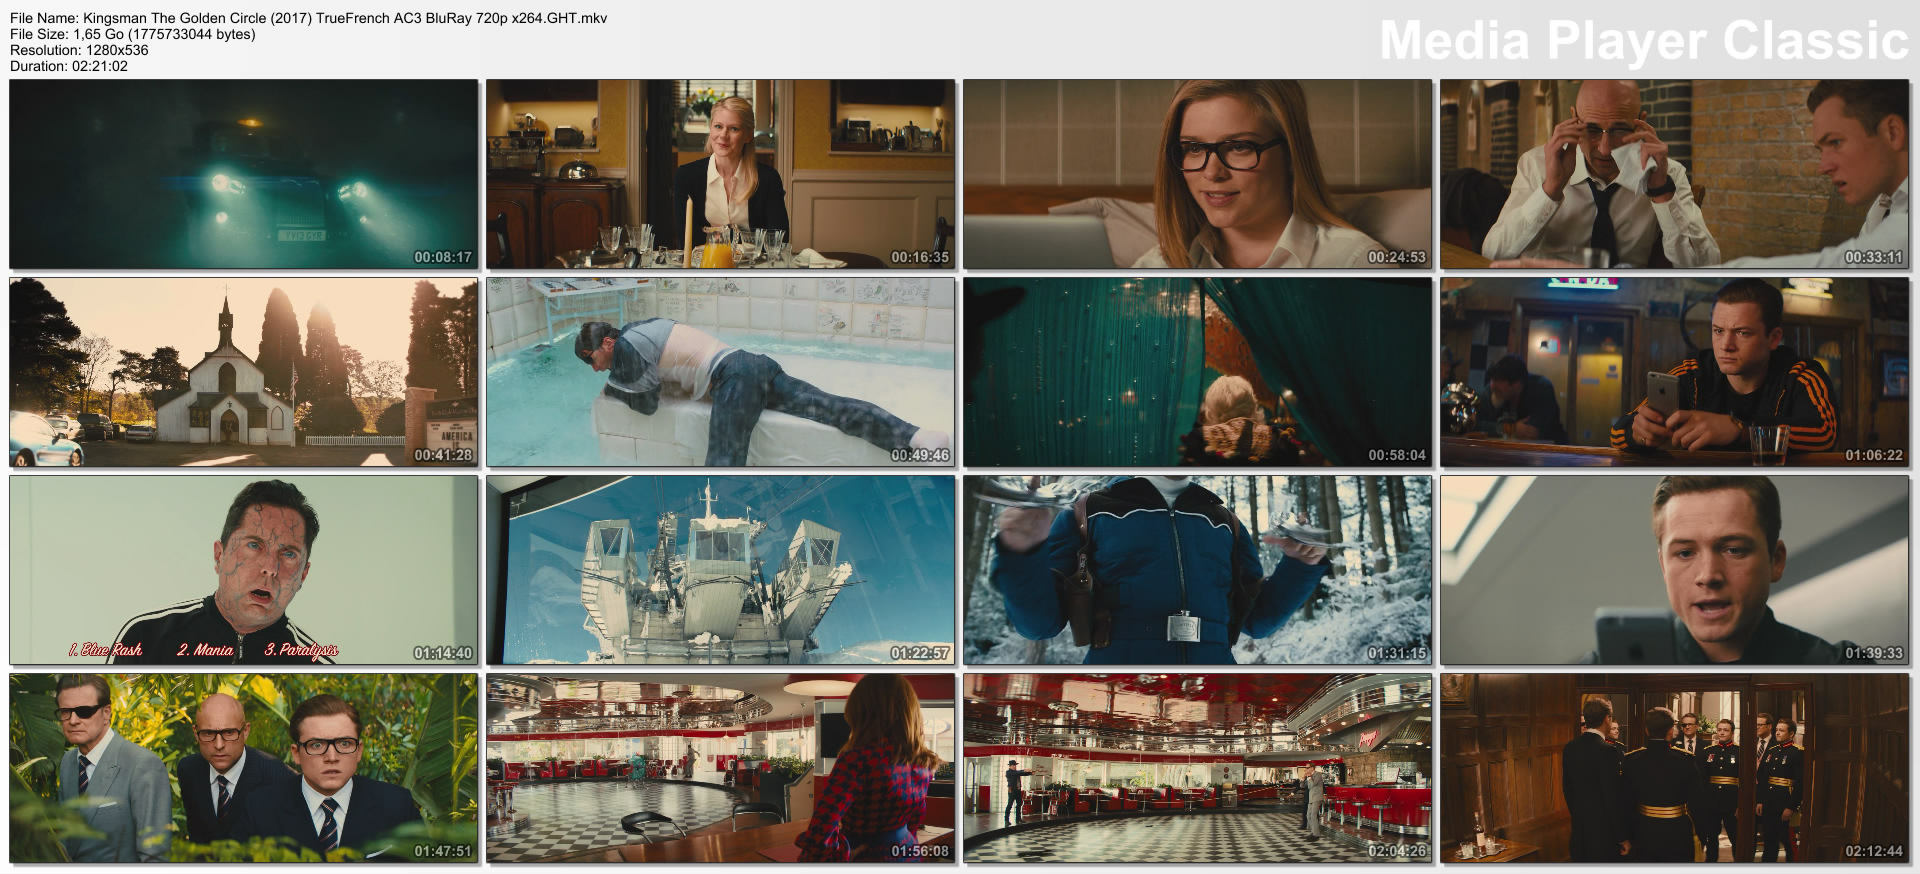 Kingsman The Golden Circle (2017) TrueFrench AC3 BluRay 720p x264.GHT